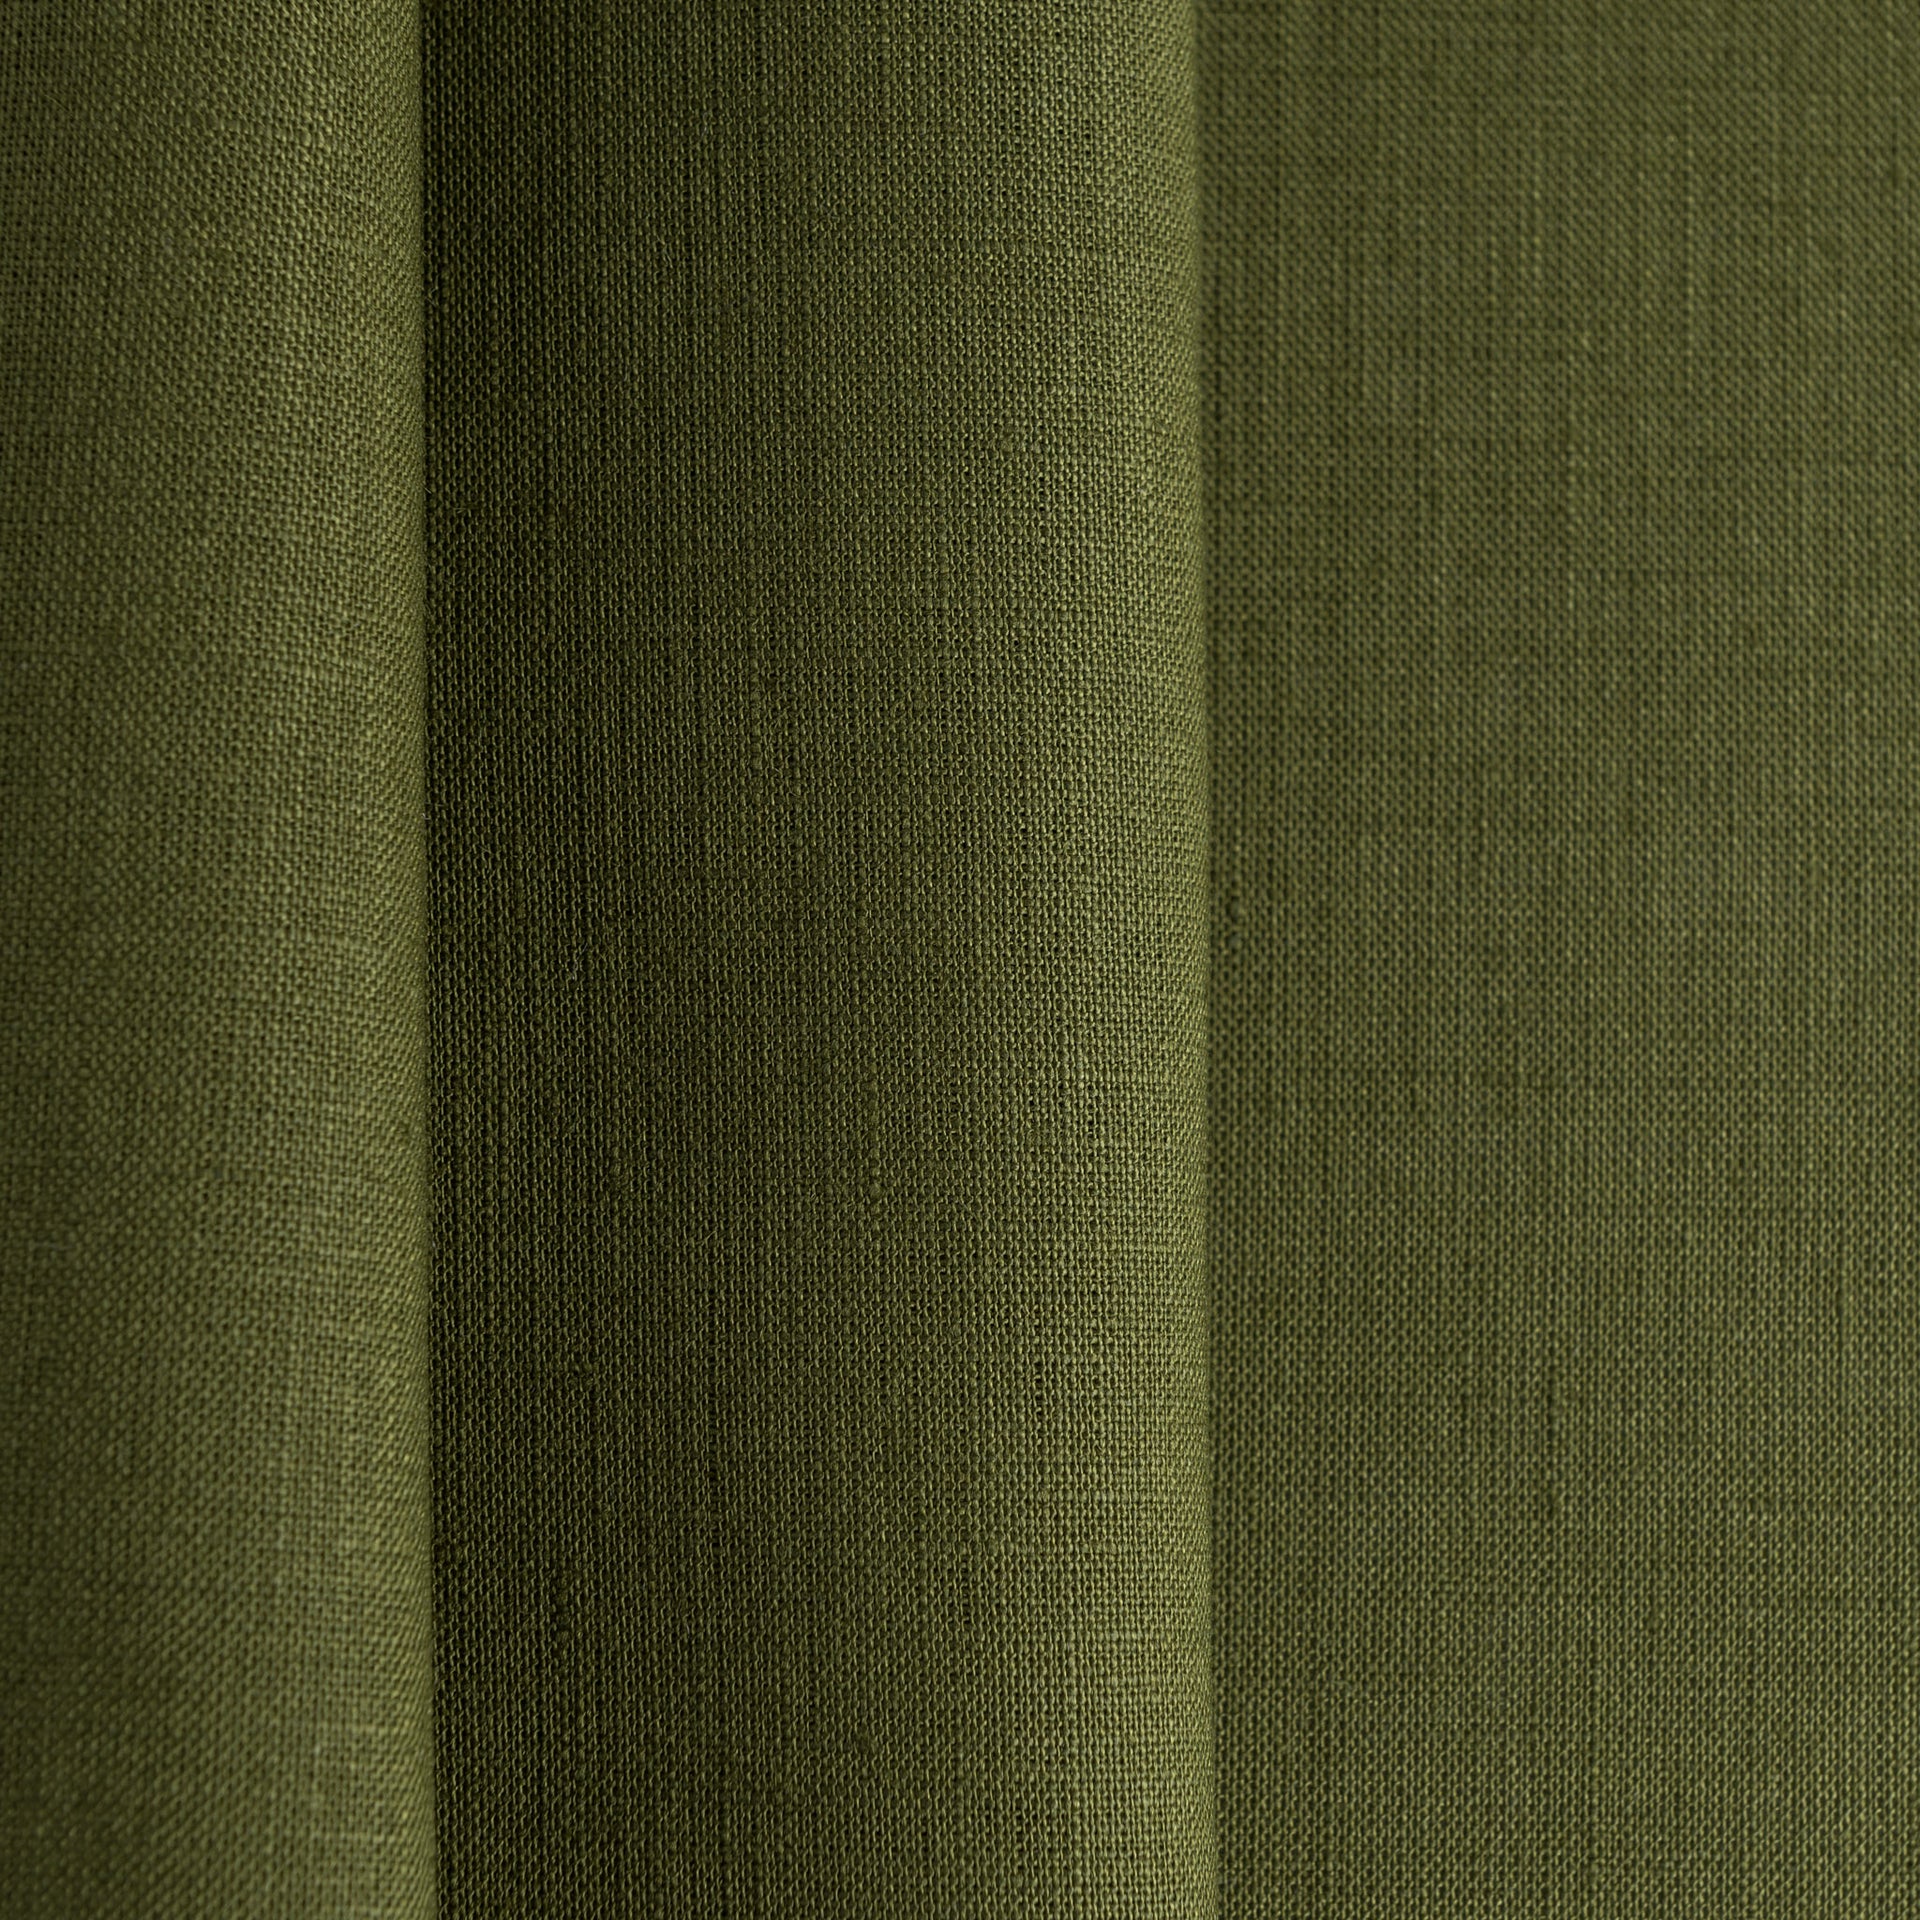 Moss Green Linen Fabric by the Yard - 100% French Natural - Width 52”